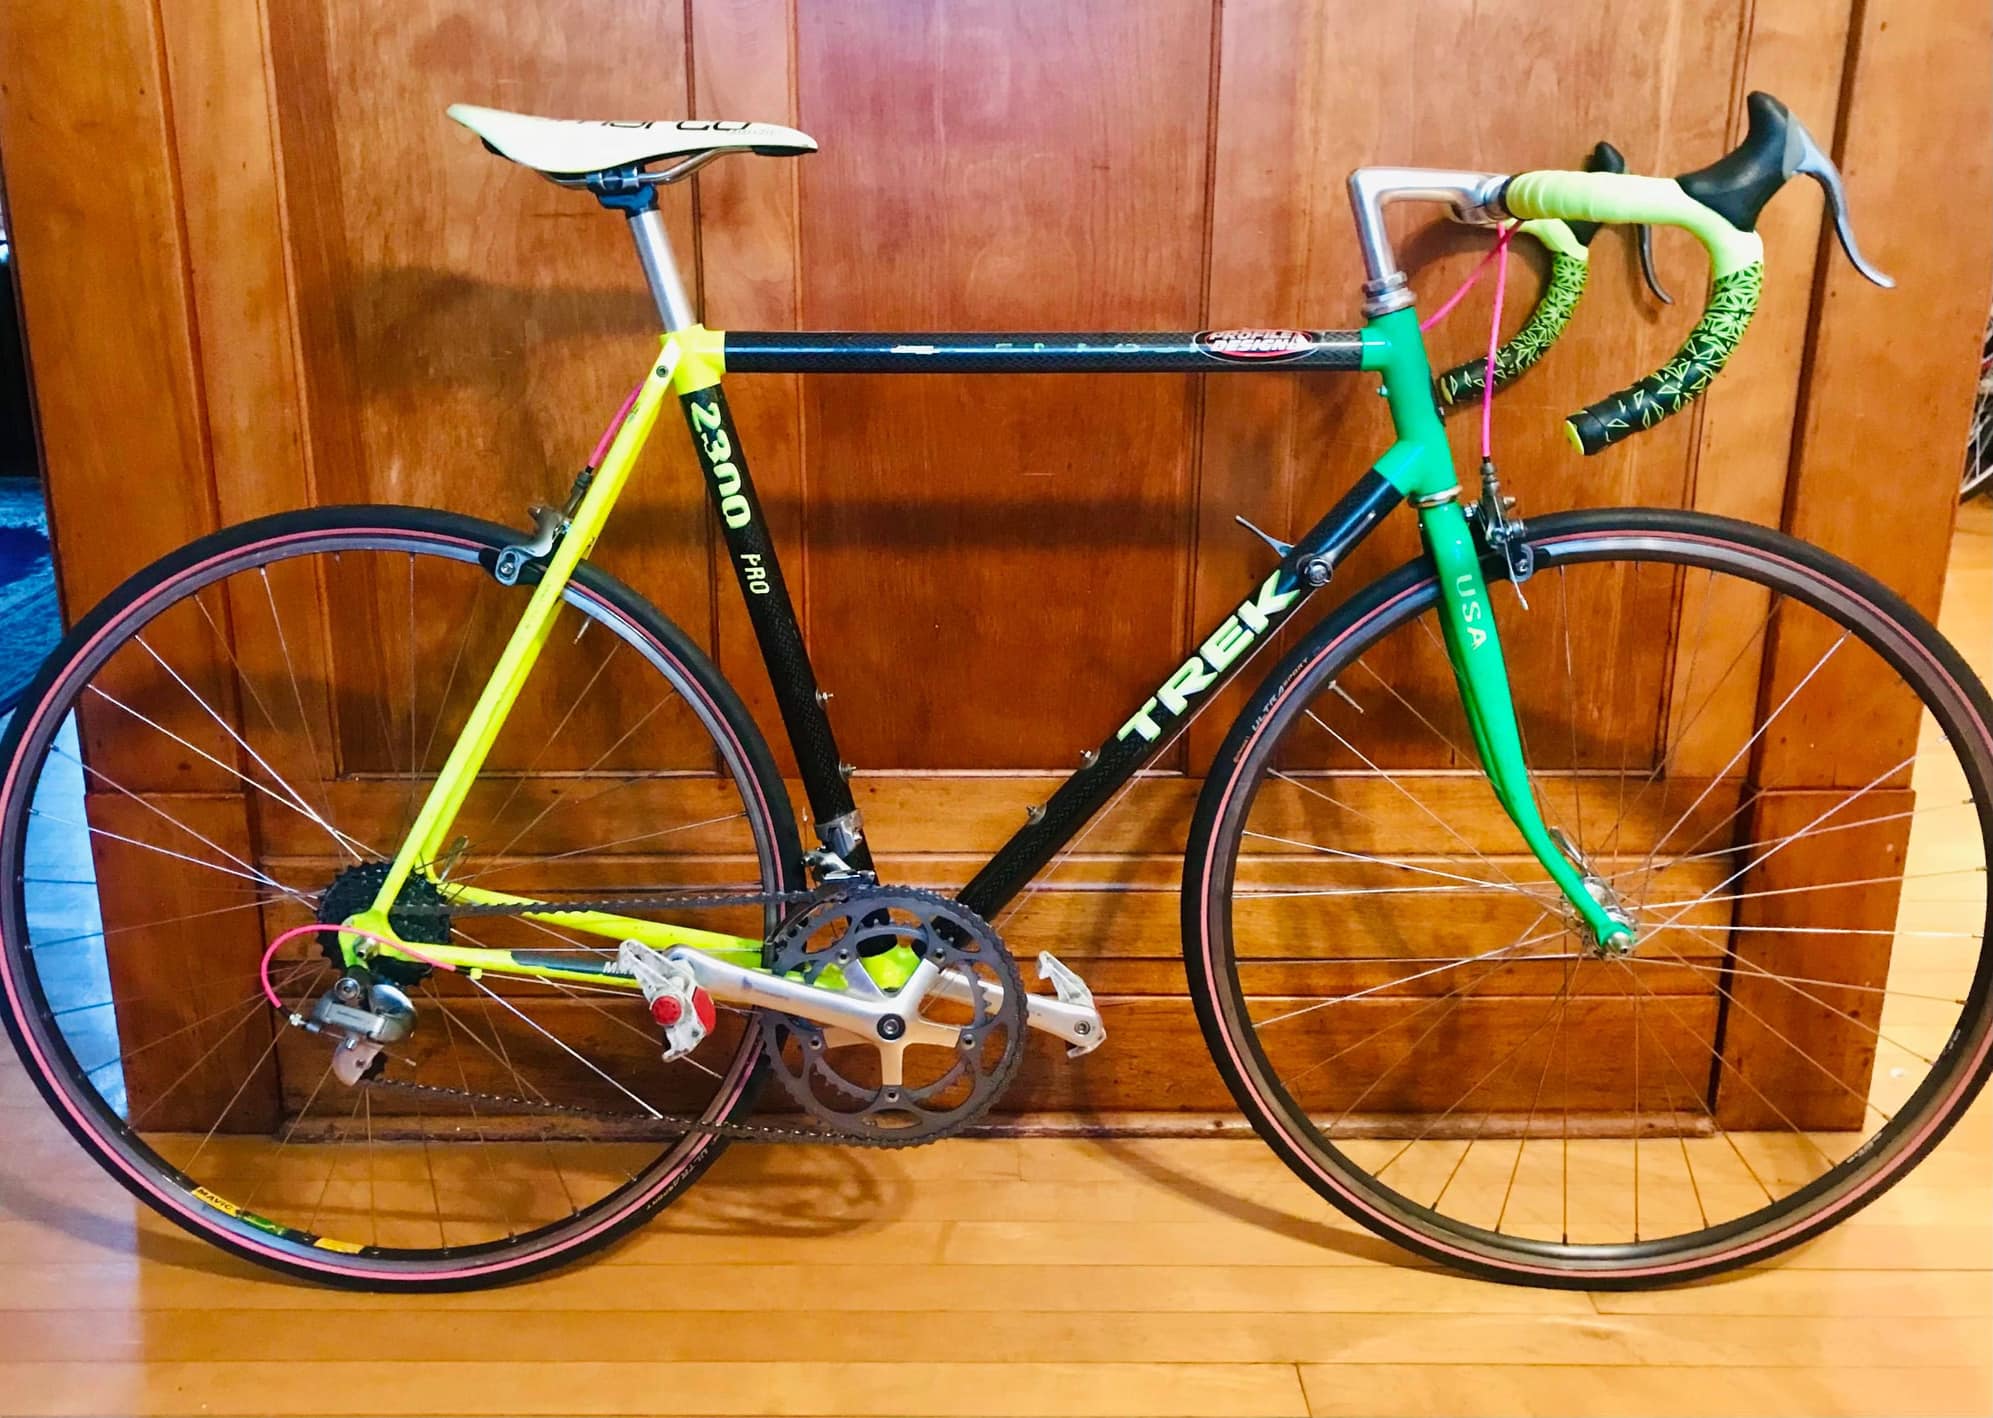 July is the month for multi-colored bikes. Got any? We want 